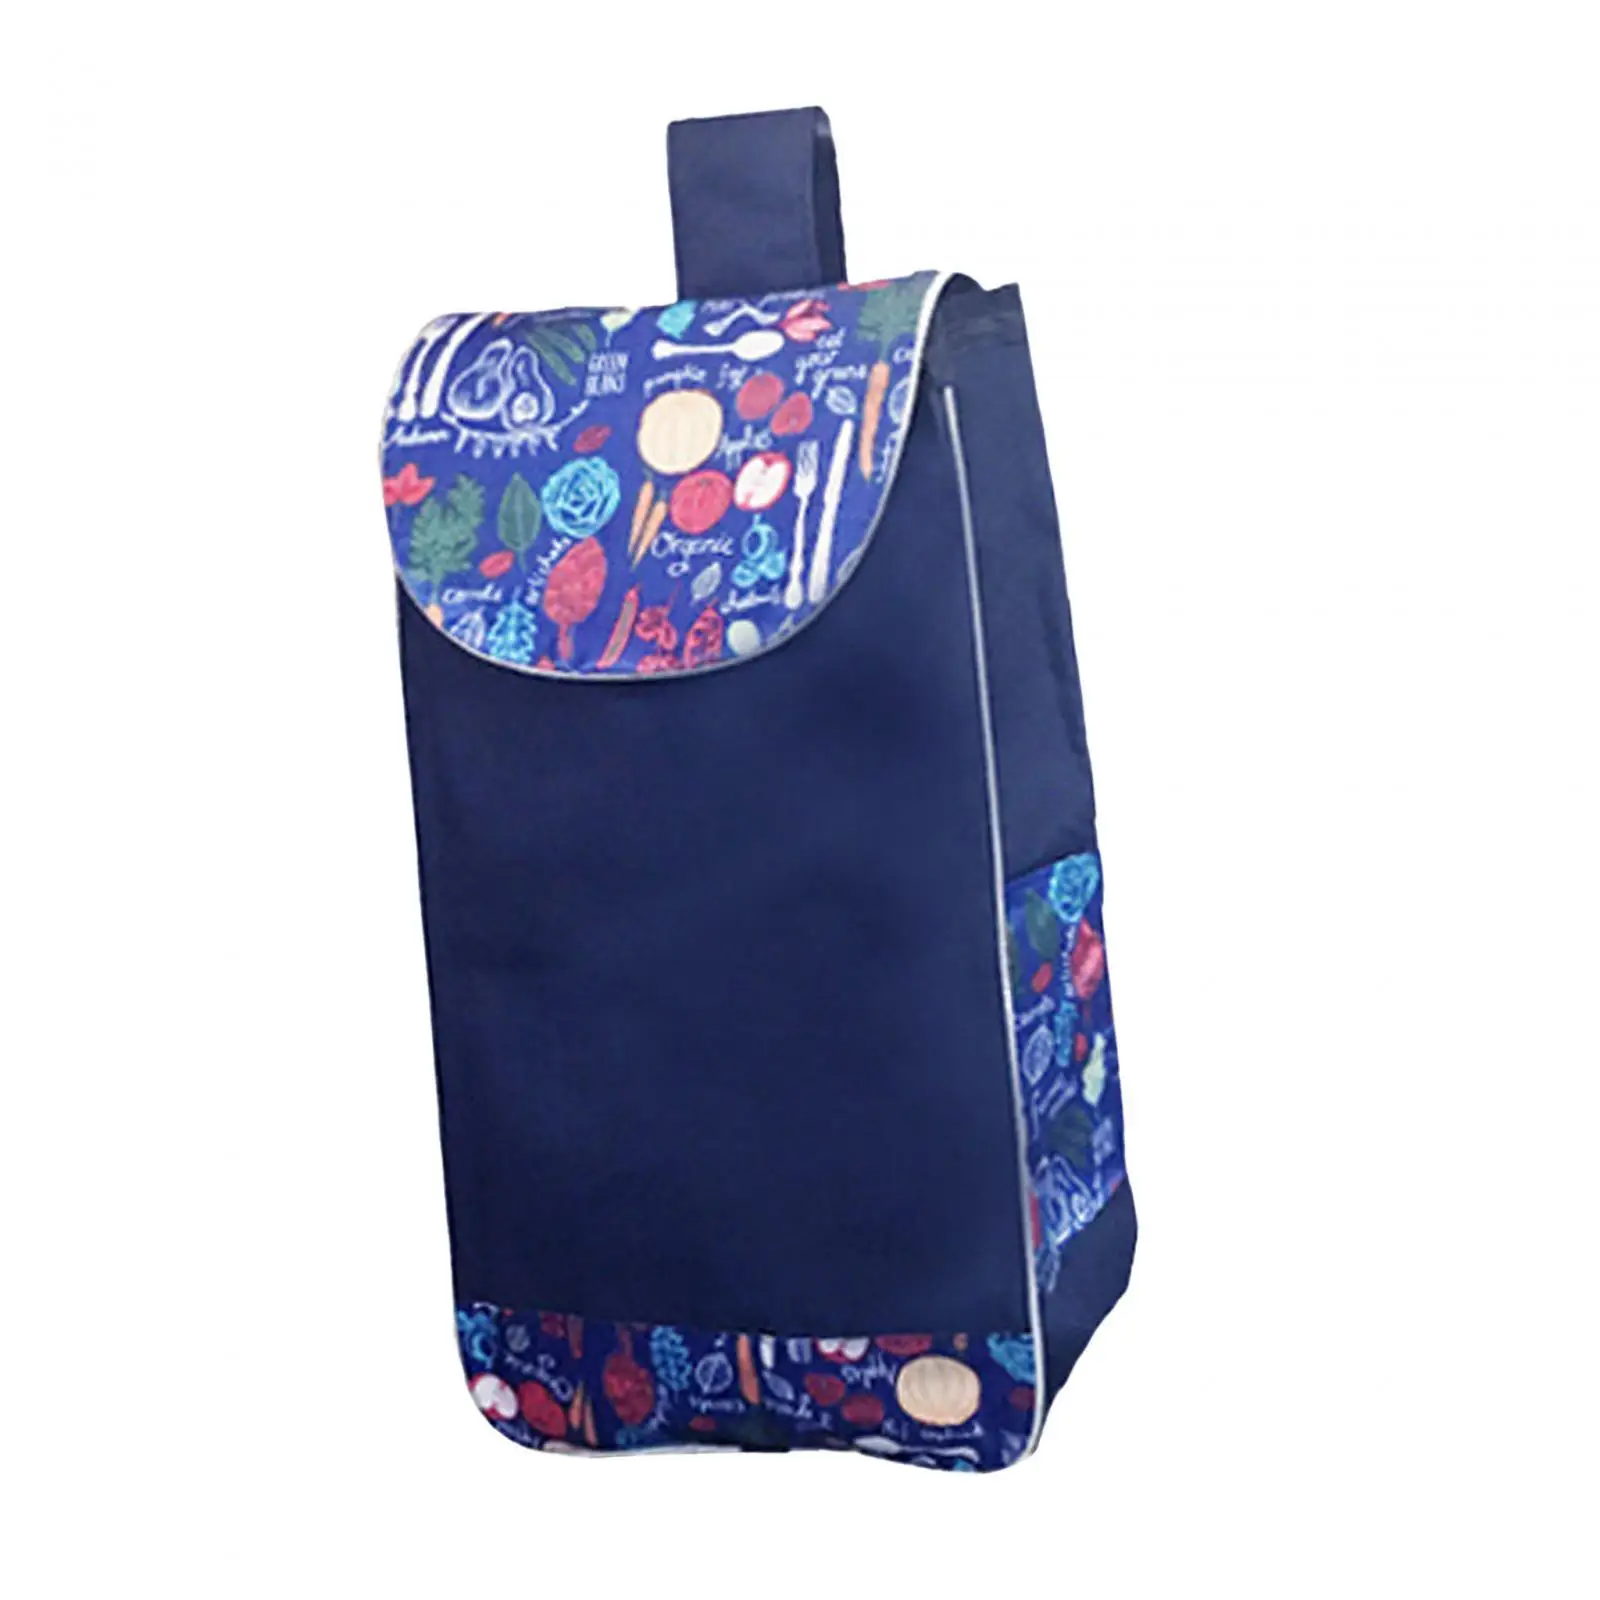 Shopping Cart Replacement Bag Waterproof for Home or Office Reusable Folding